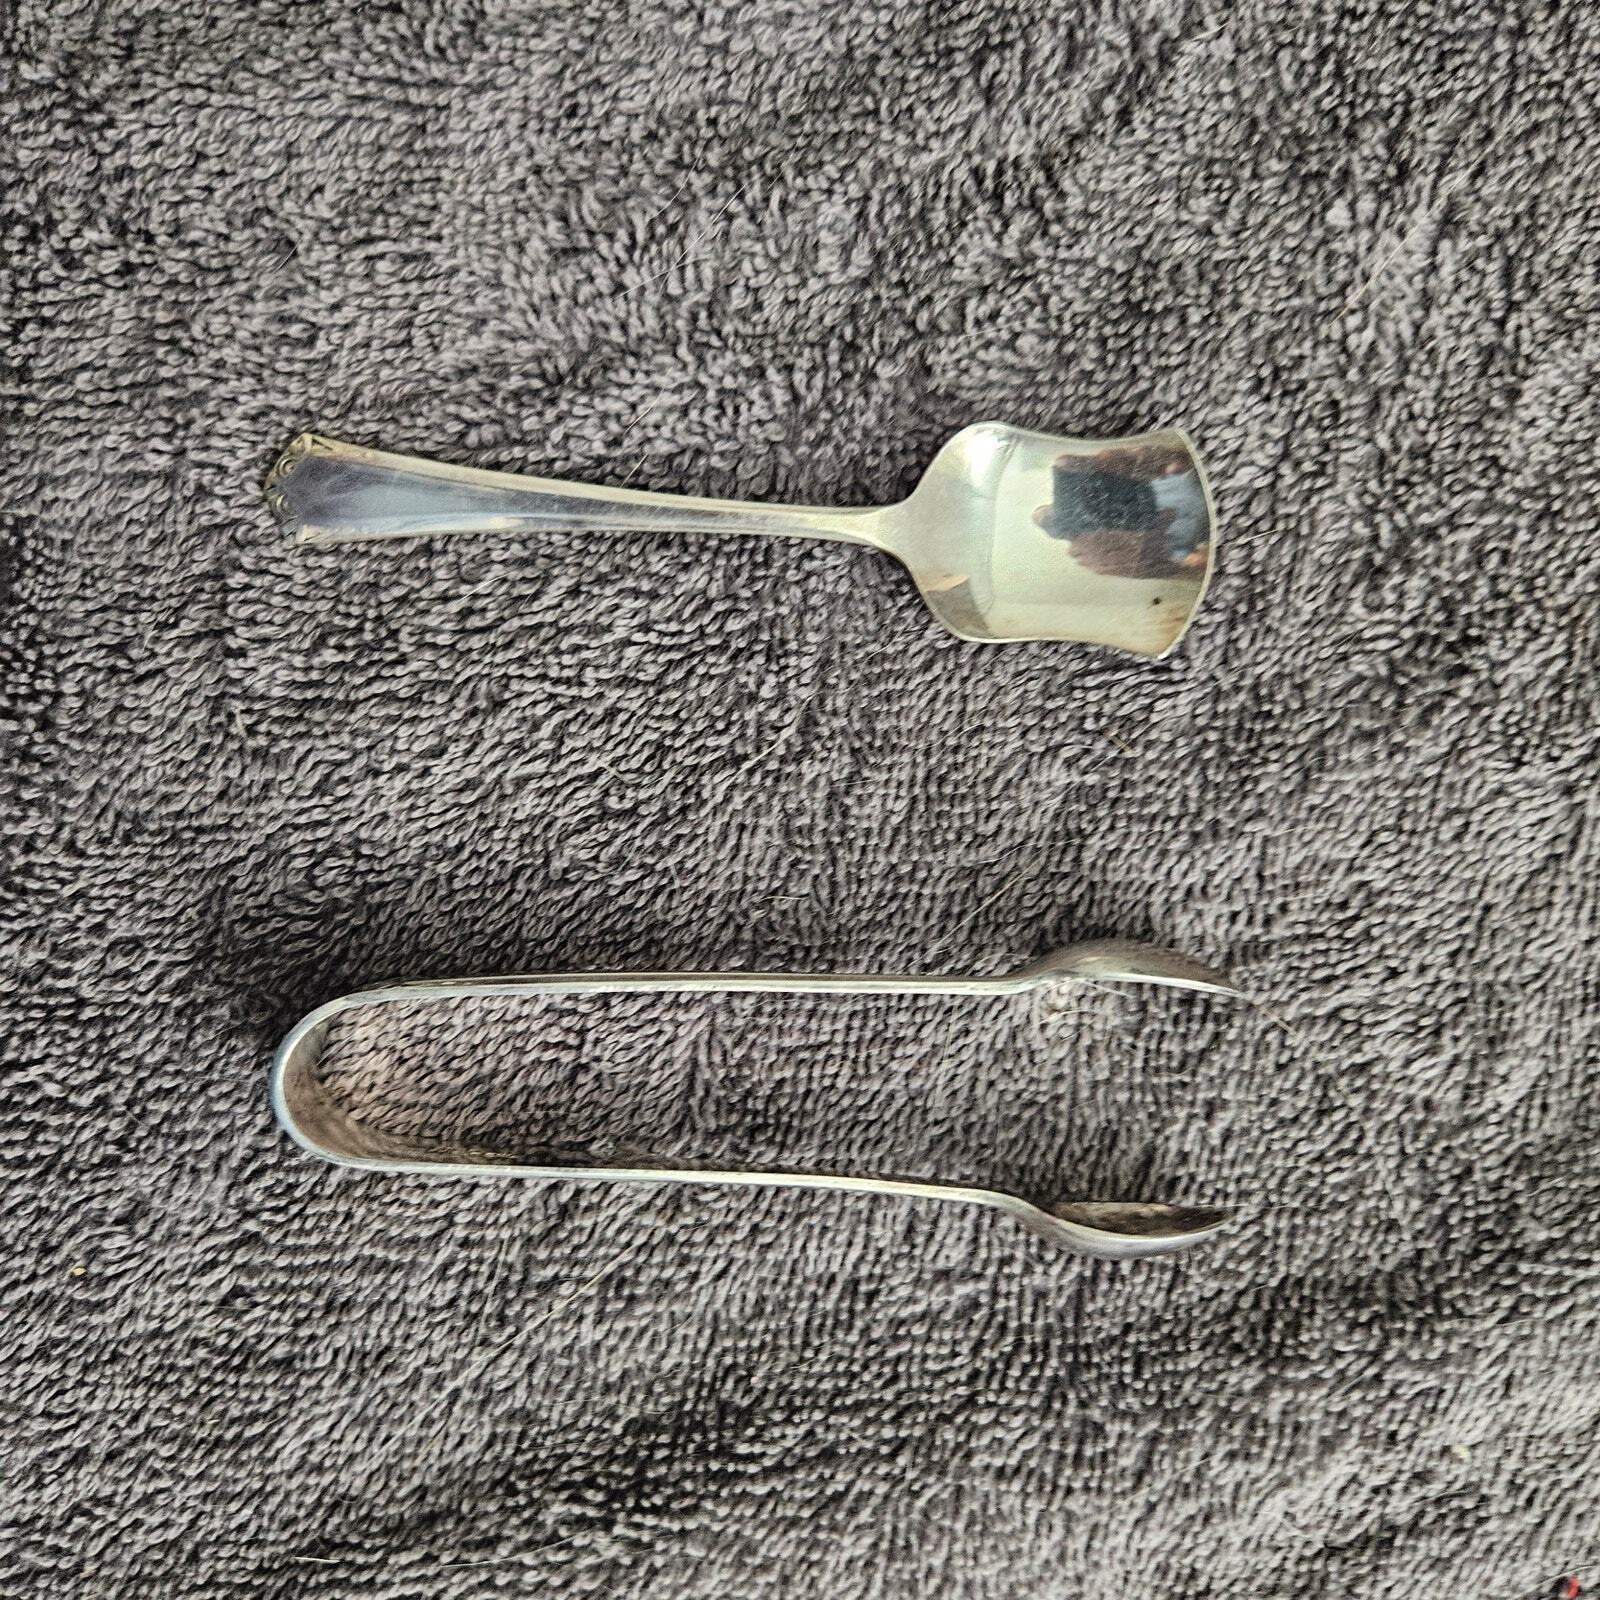 Sheffield EPNS Silverplate Sugar Tongs and Scoop Spoon - England